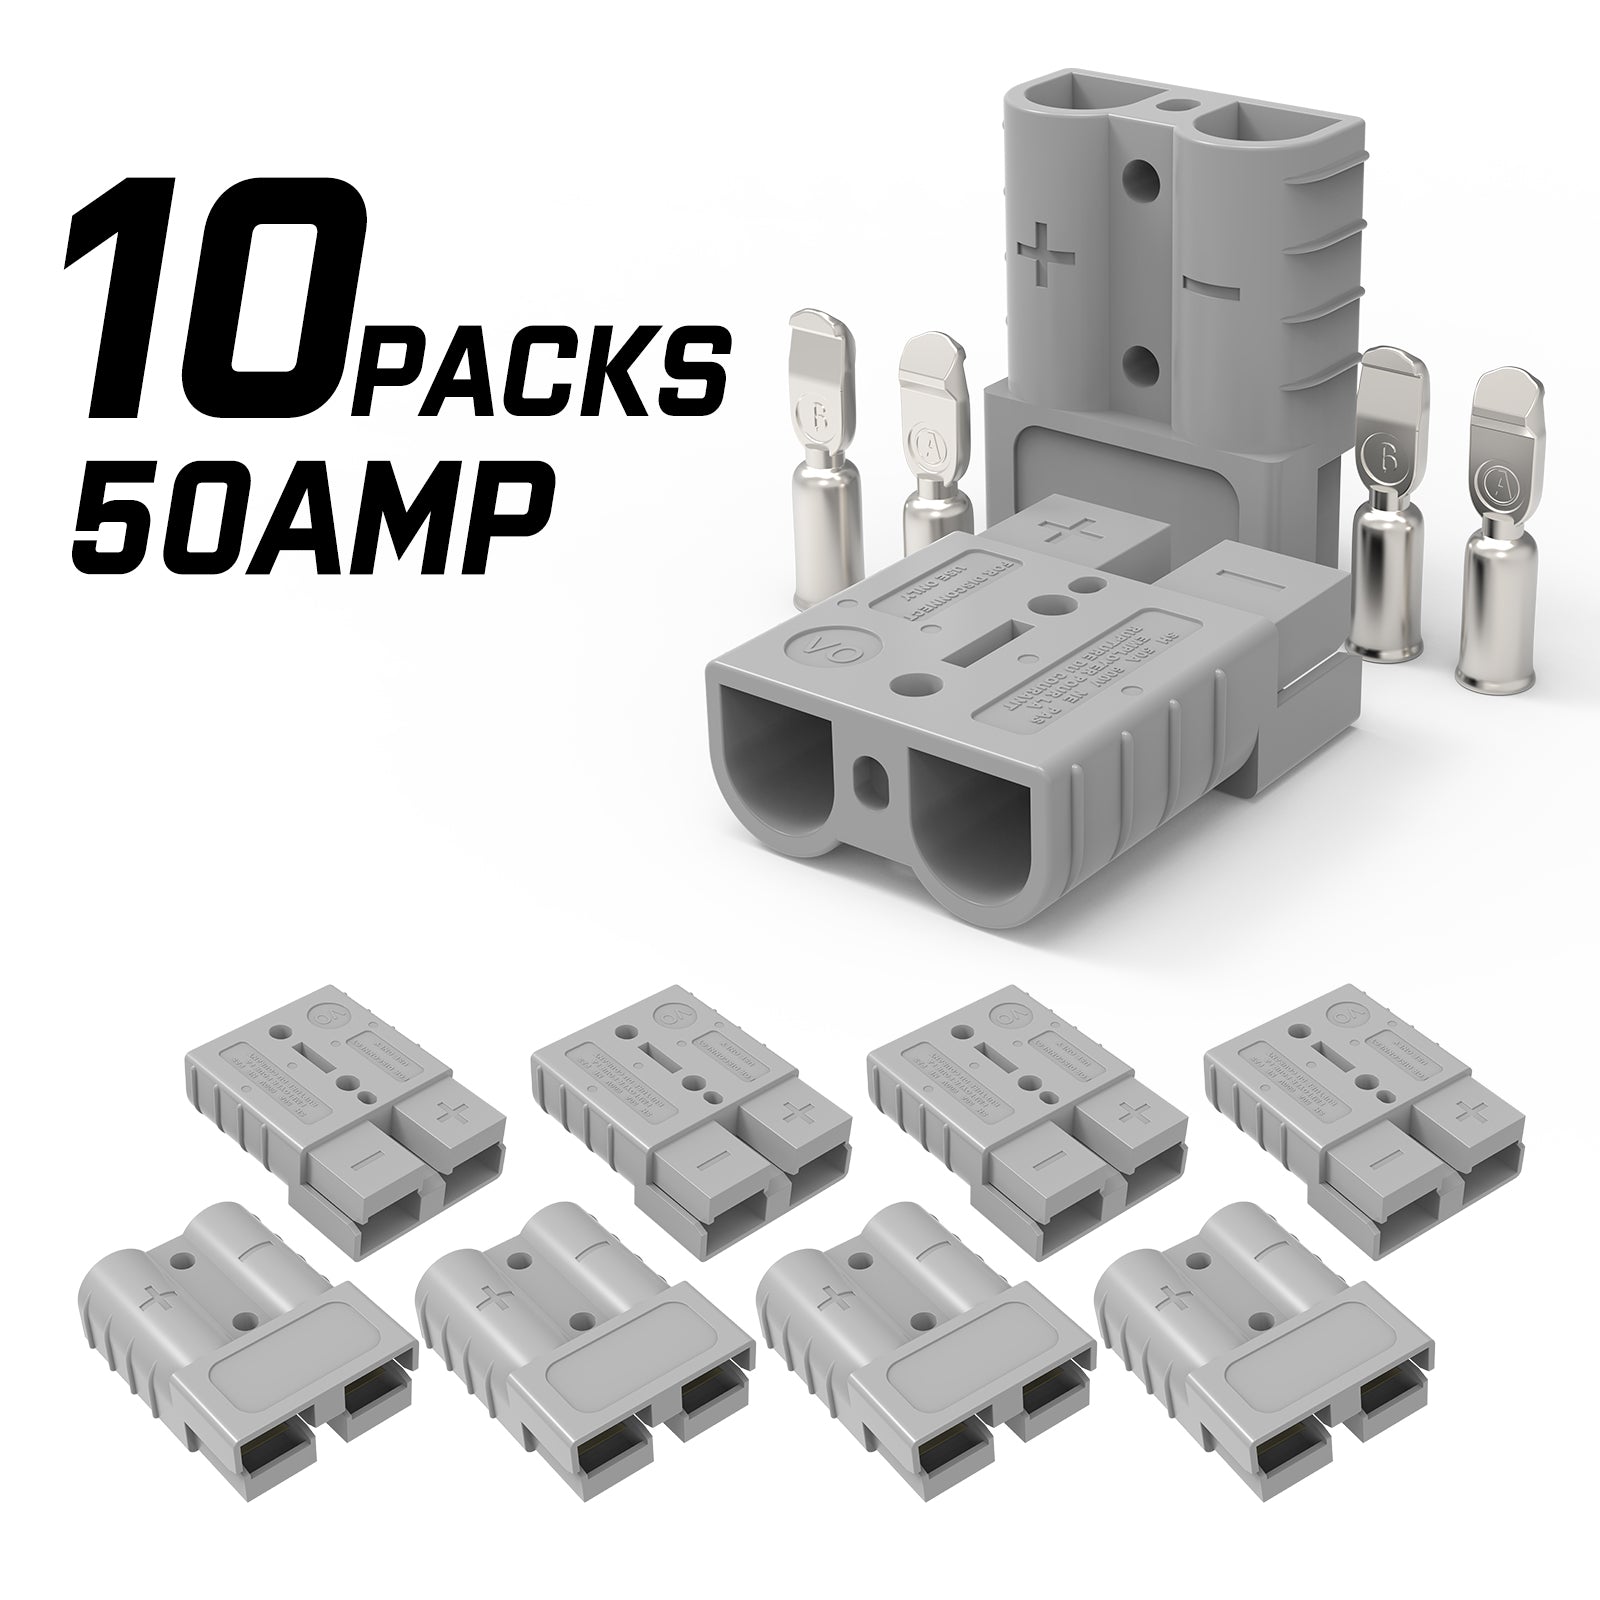 **** 10x 50AMP 12-24V Anderson Plug Set, Silver-Plated Terminals